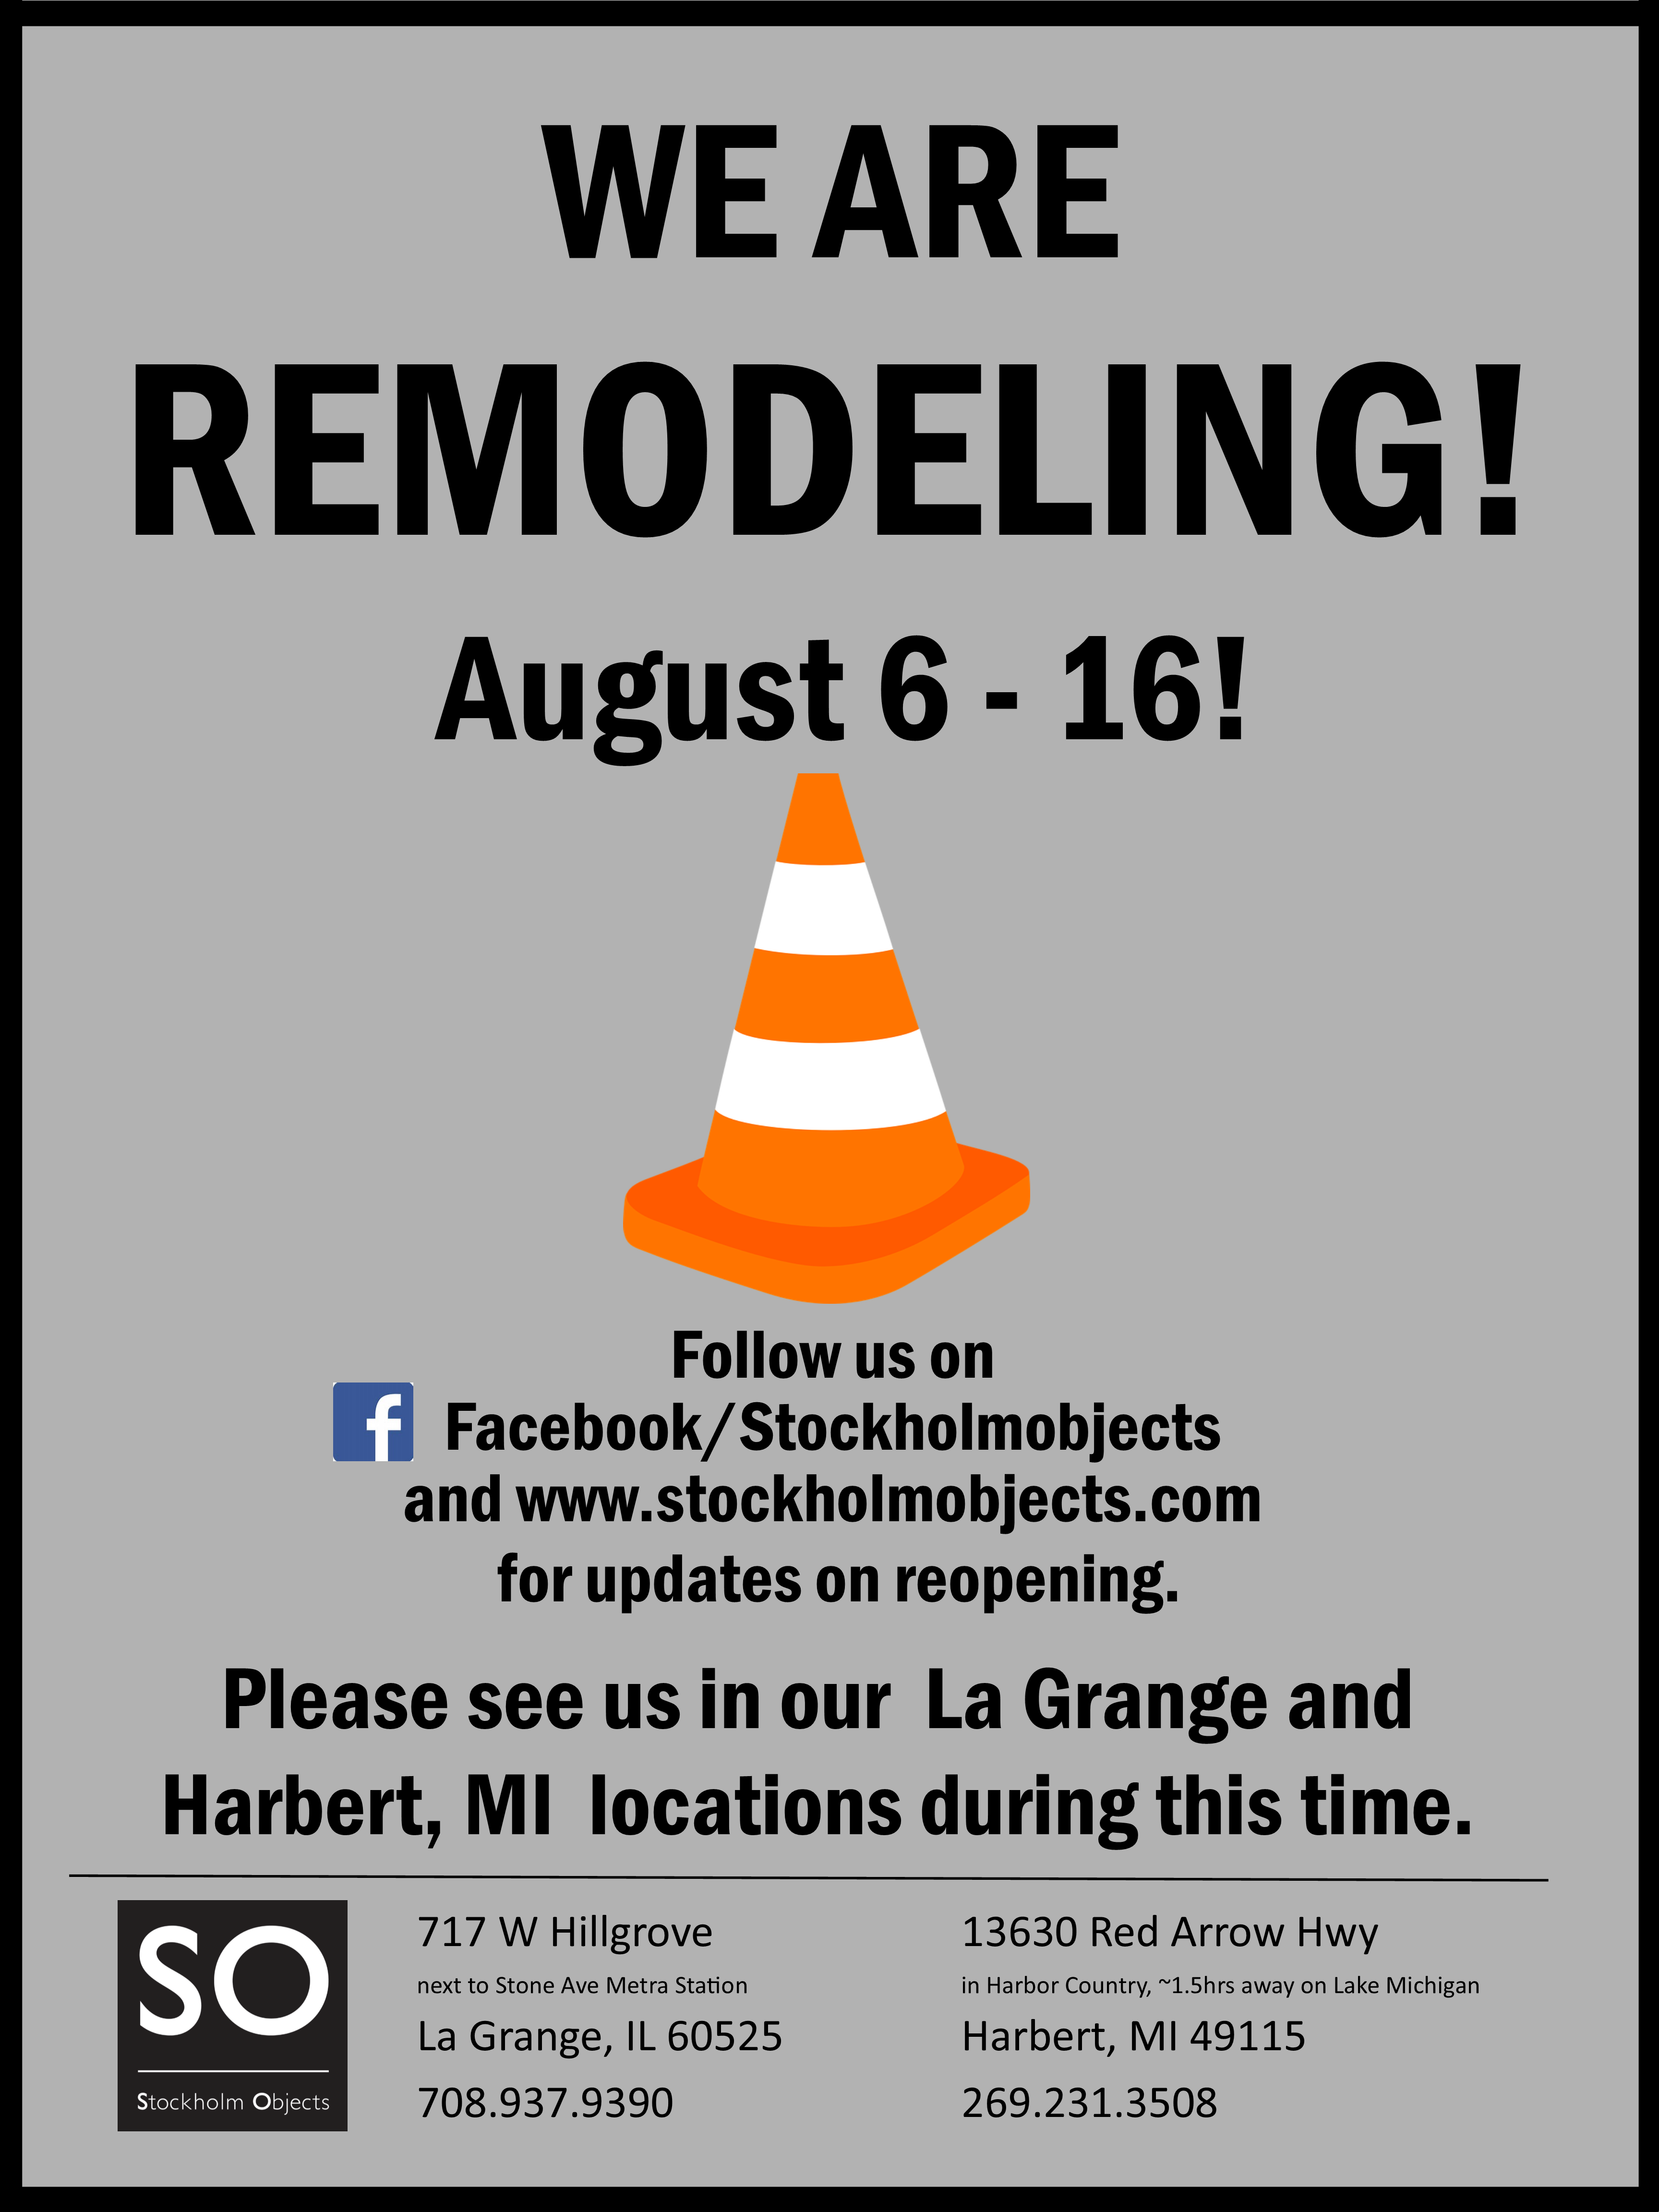 remodeling-poster-2017-2.png